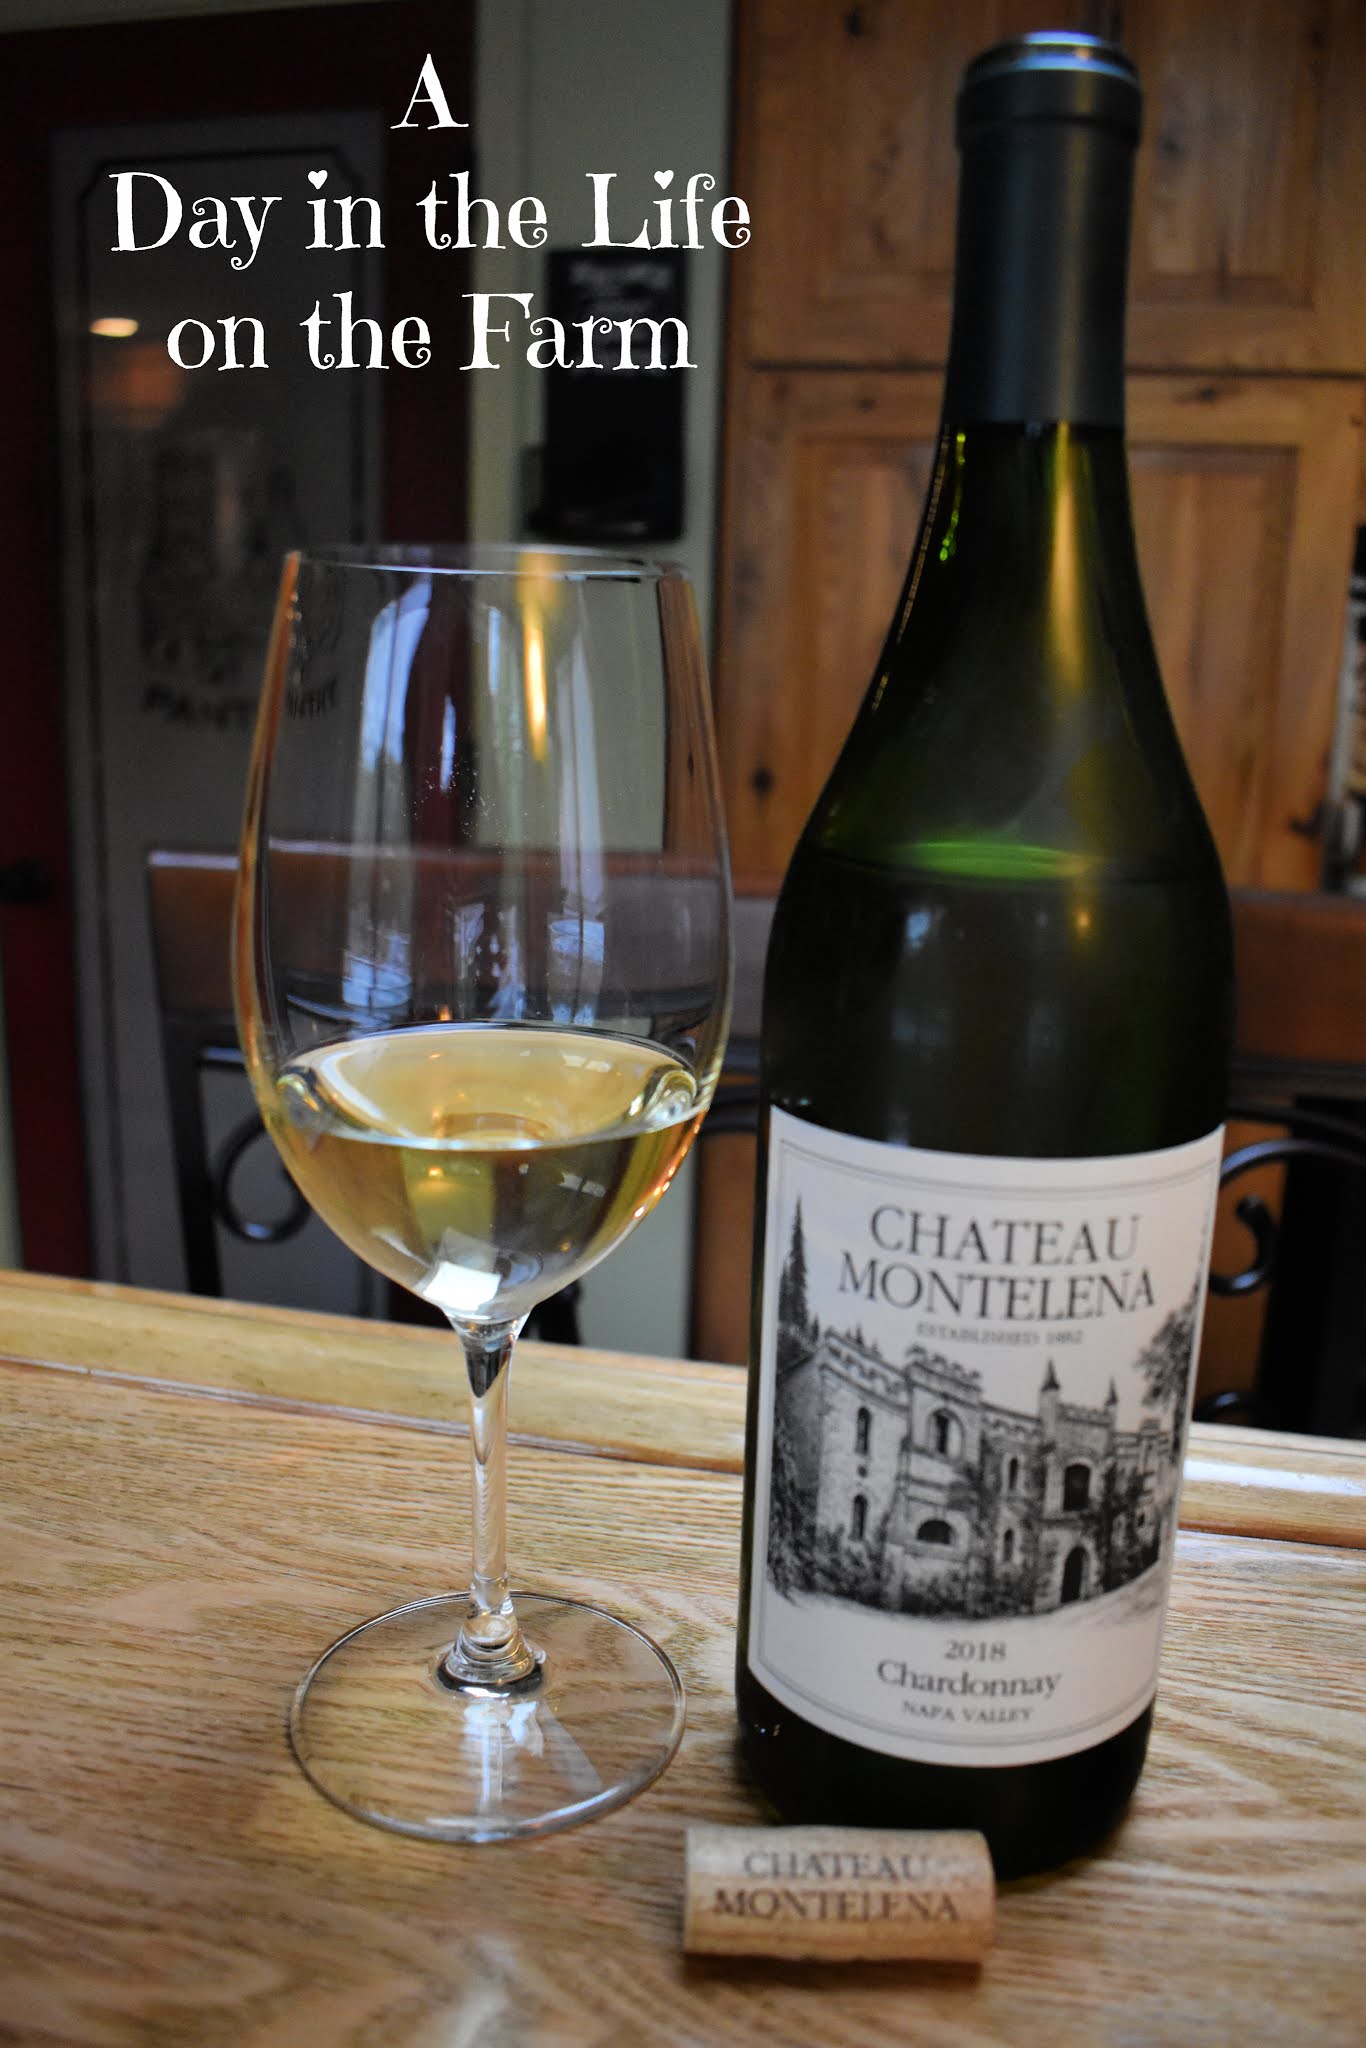 Chateau Montelena Winery: Beyond Bottle Shock (VIDEO) - Wine Oh! TV